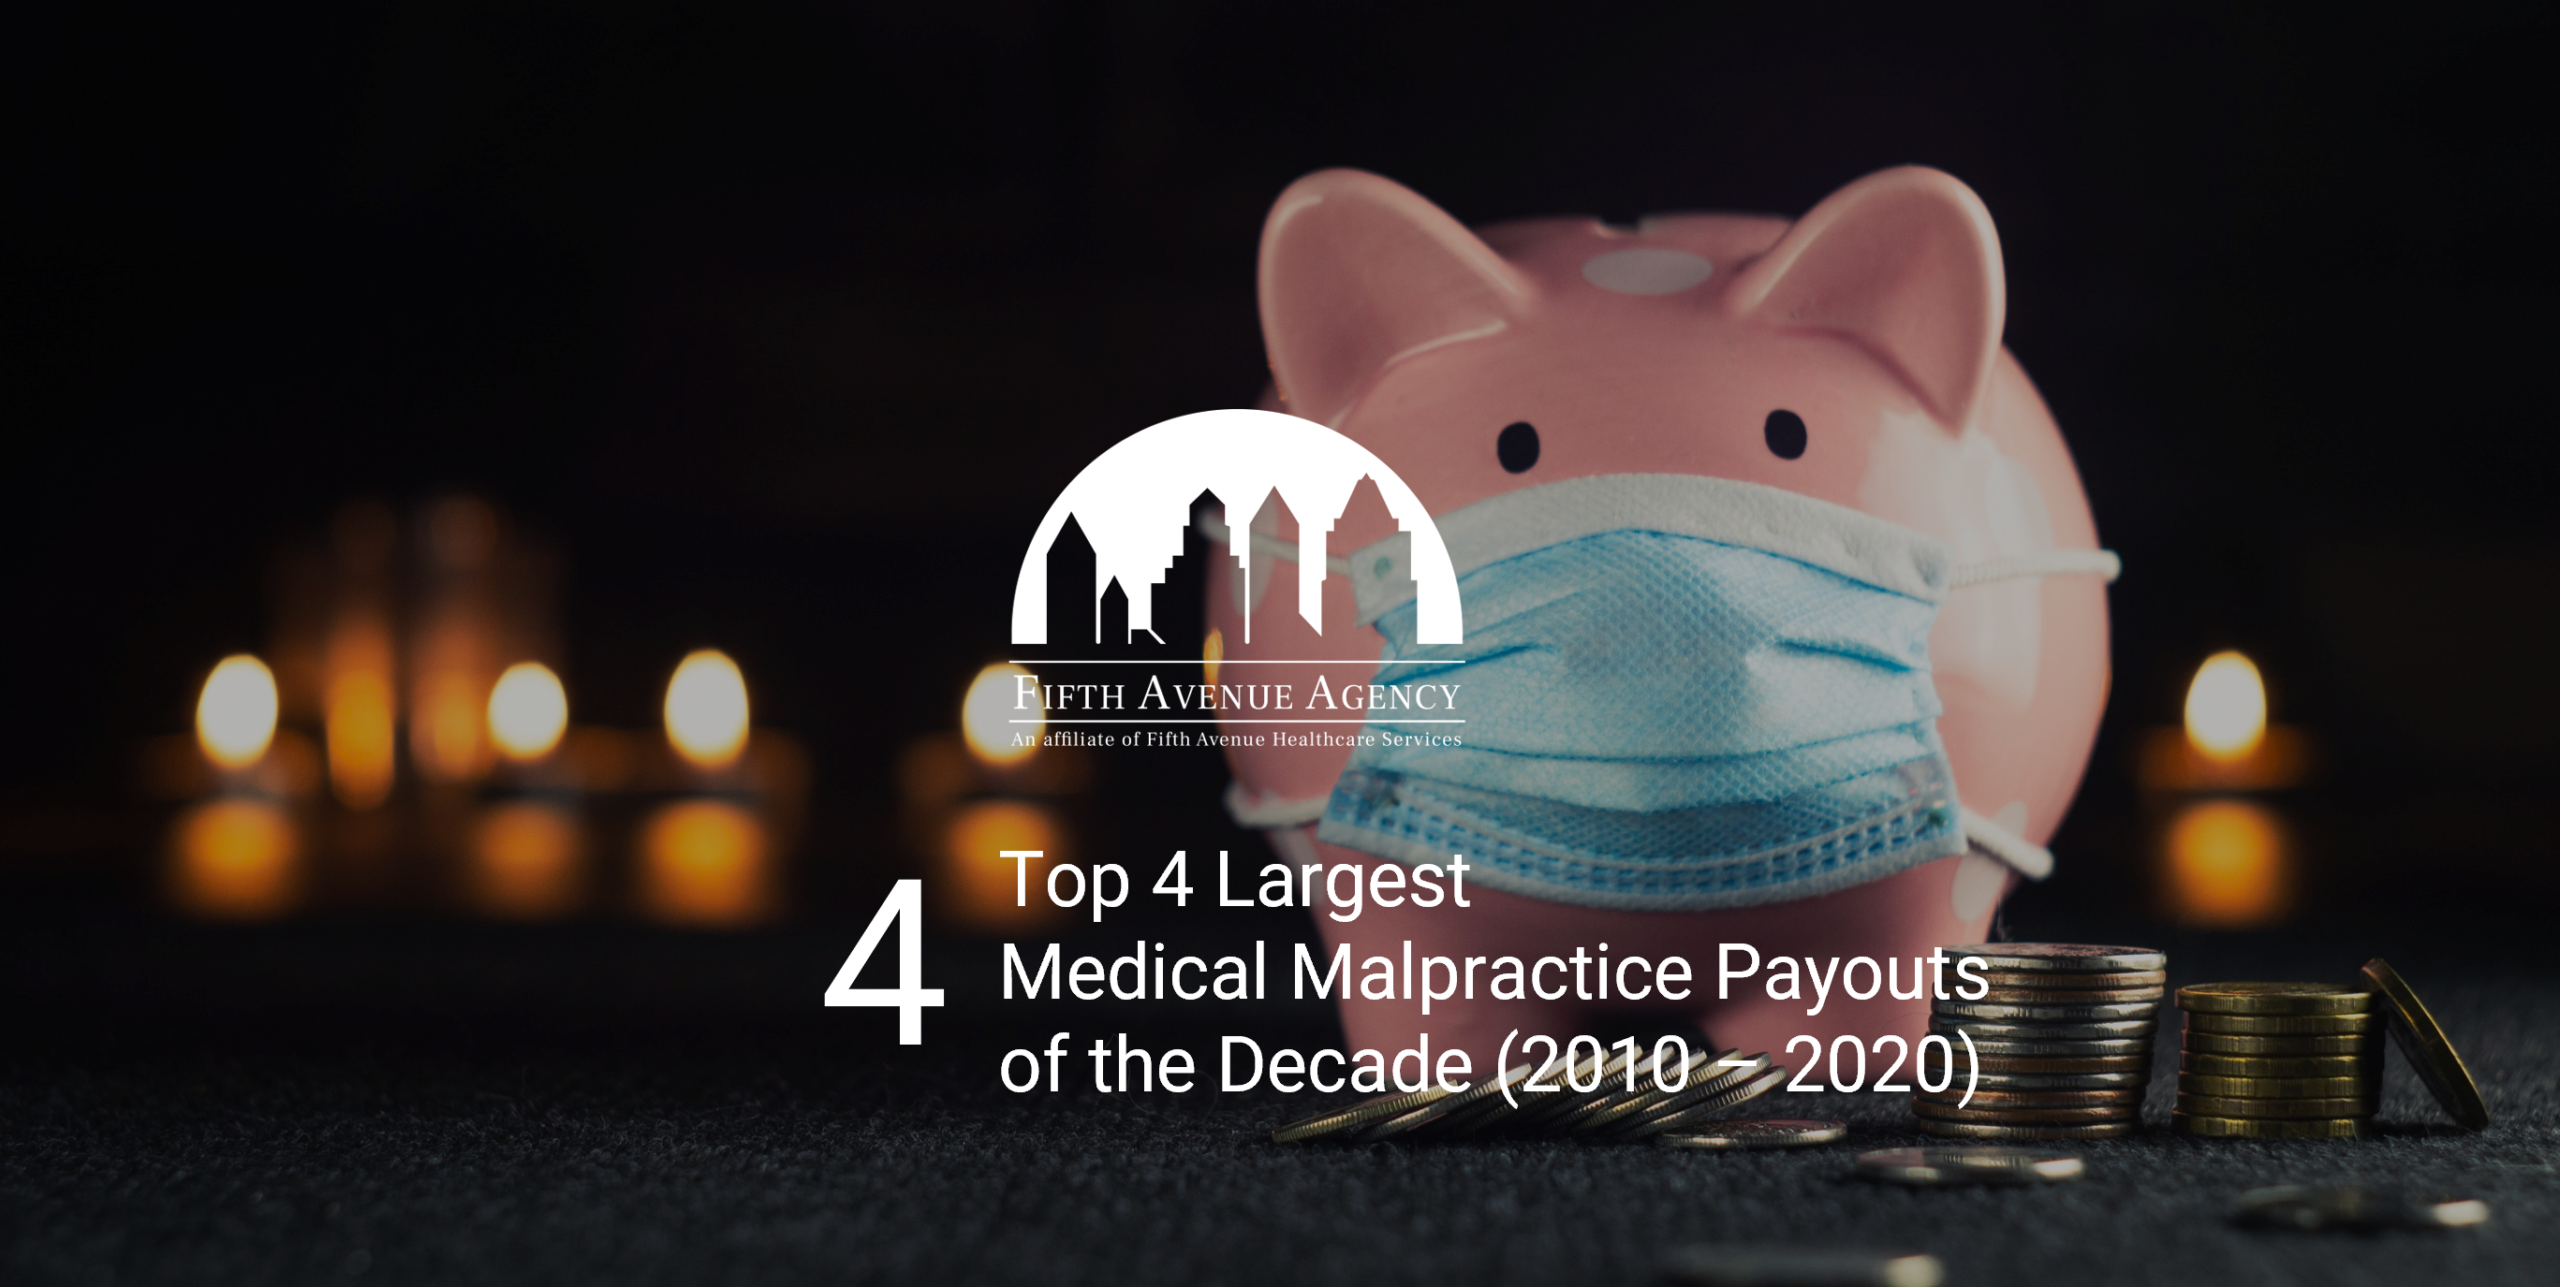 FifthAvenueAgency.com Top 4 Largest Medical Malpractice Payouts